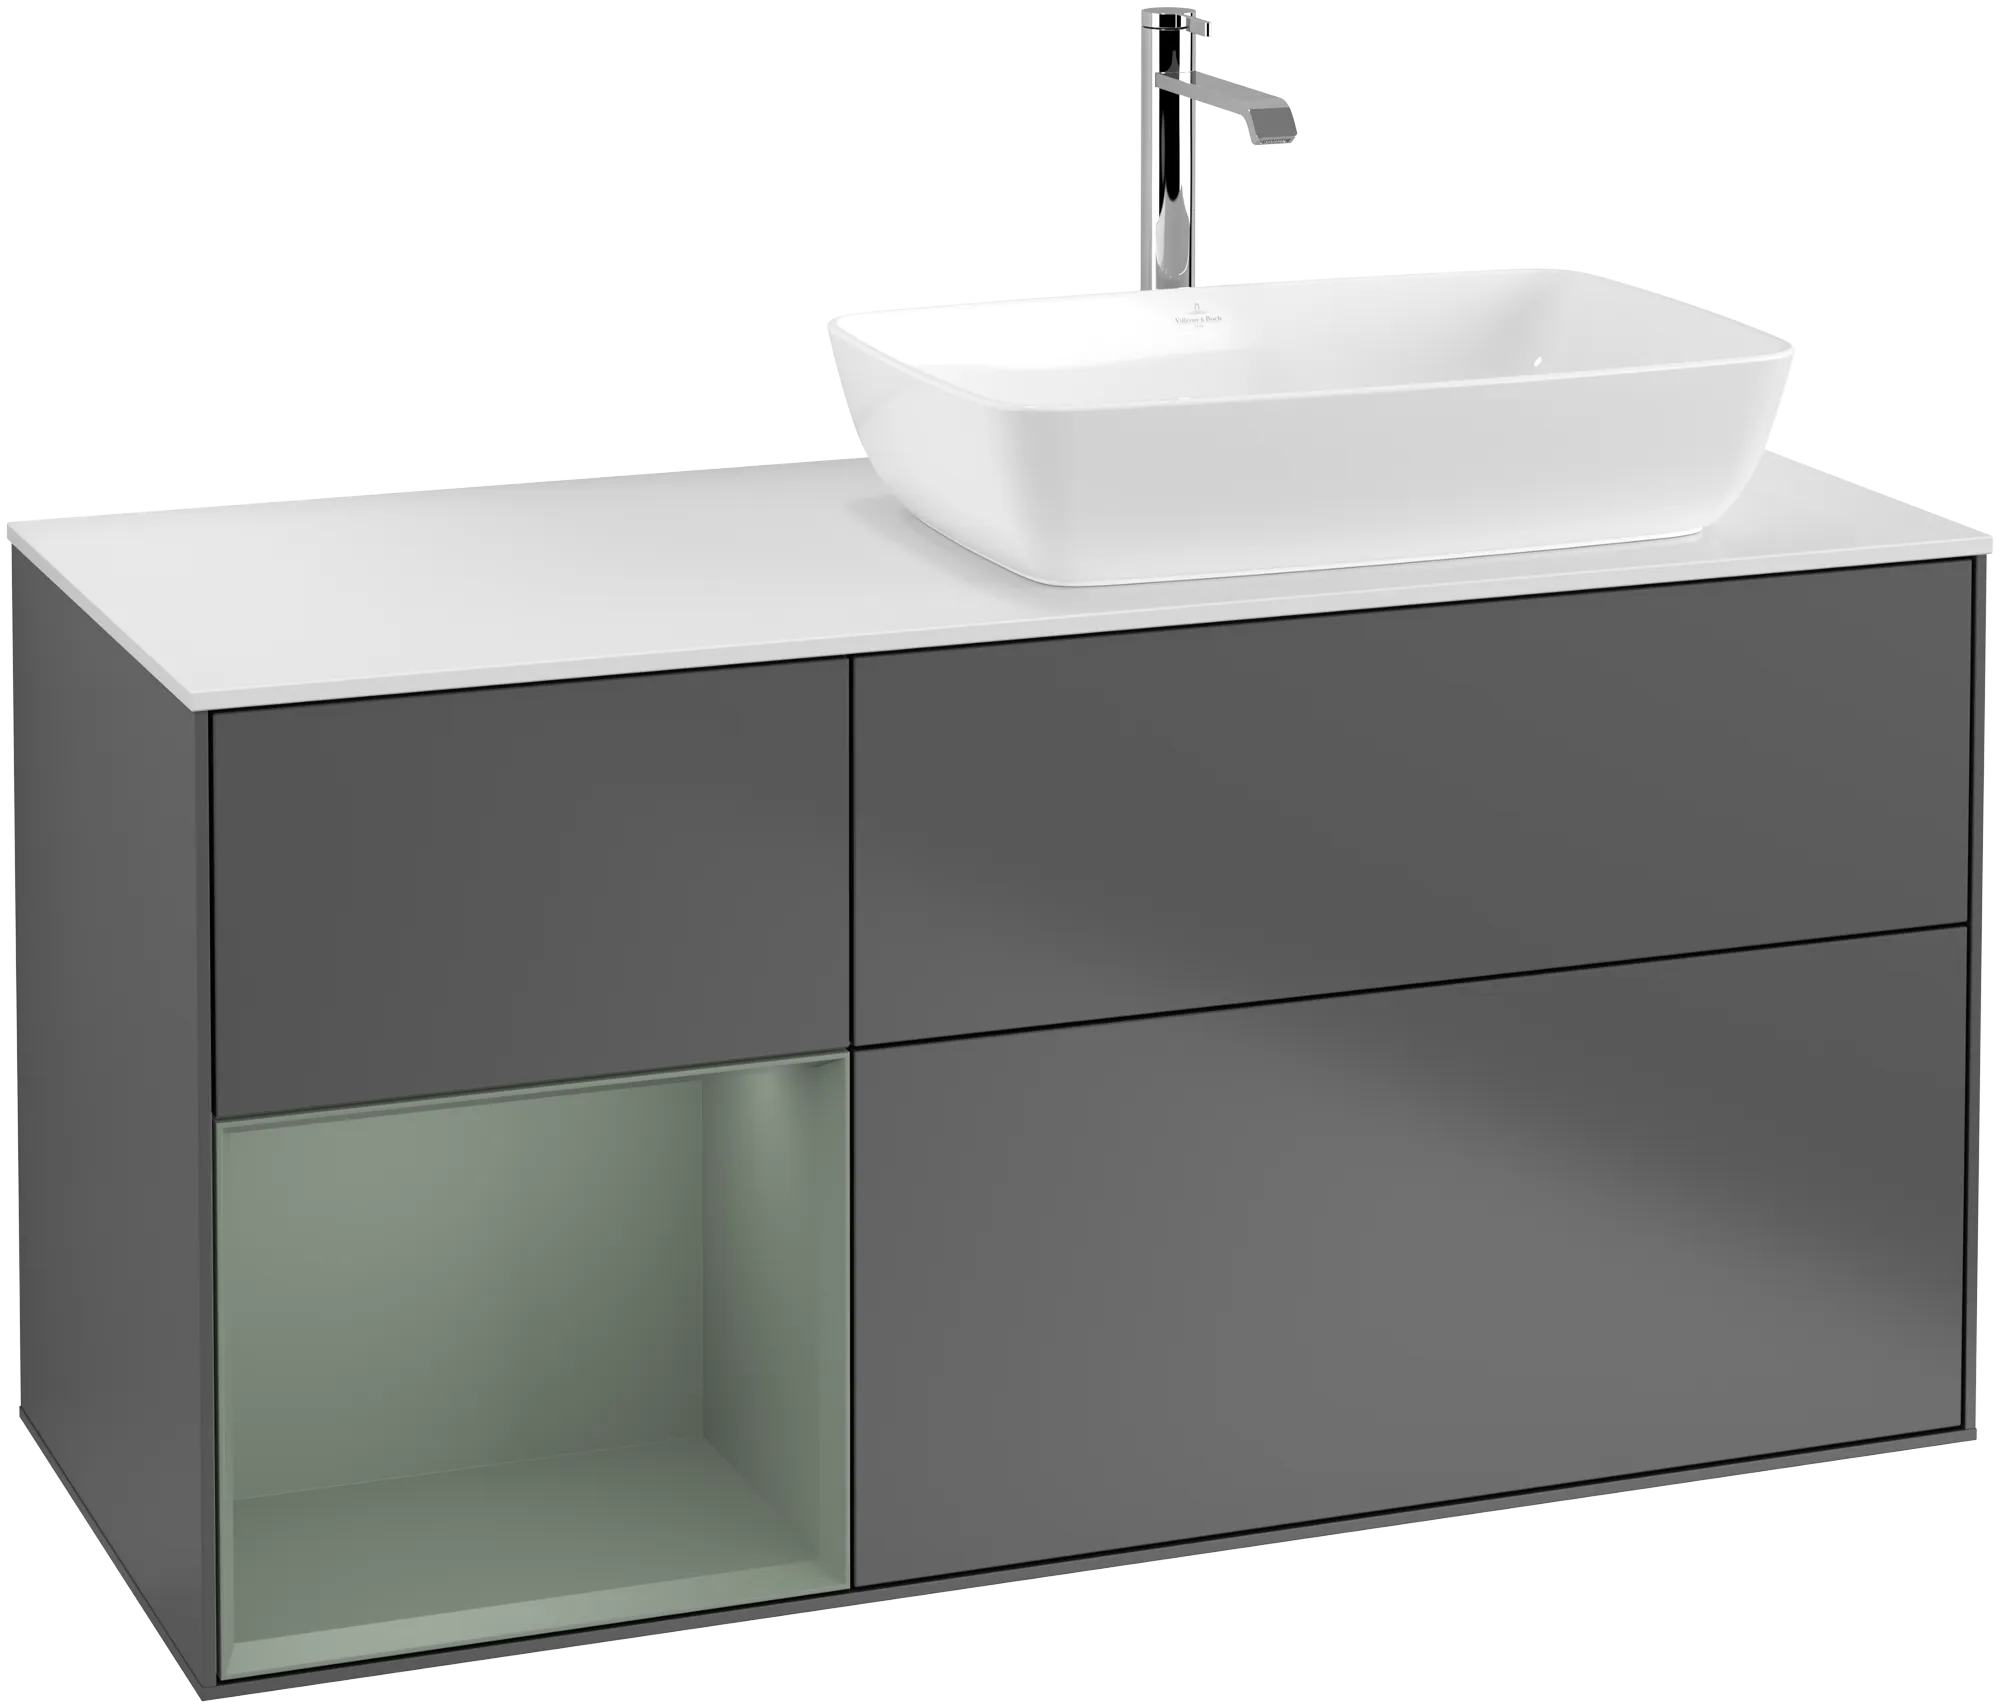 Зображення з  VILLEROY BOCH Finion Vanity unit, with lighting, 3 pull-out compartments, 1200 x 603 x 501 mm, Anthracite Matt Lacquer / Olive Matt Lacquer / Glass White Matt #G801GMGK